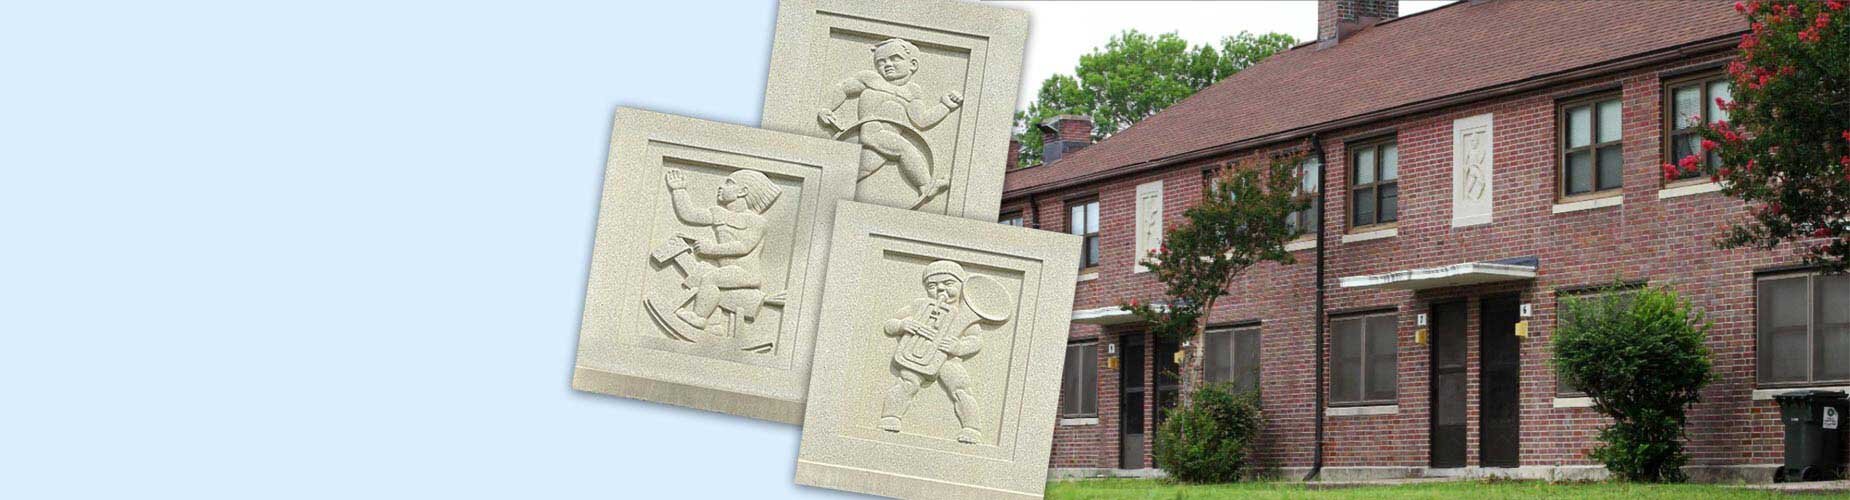 Bas relief decorations from Trent Court facility